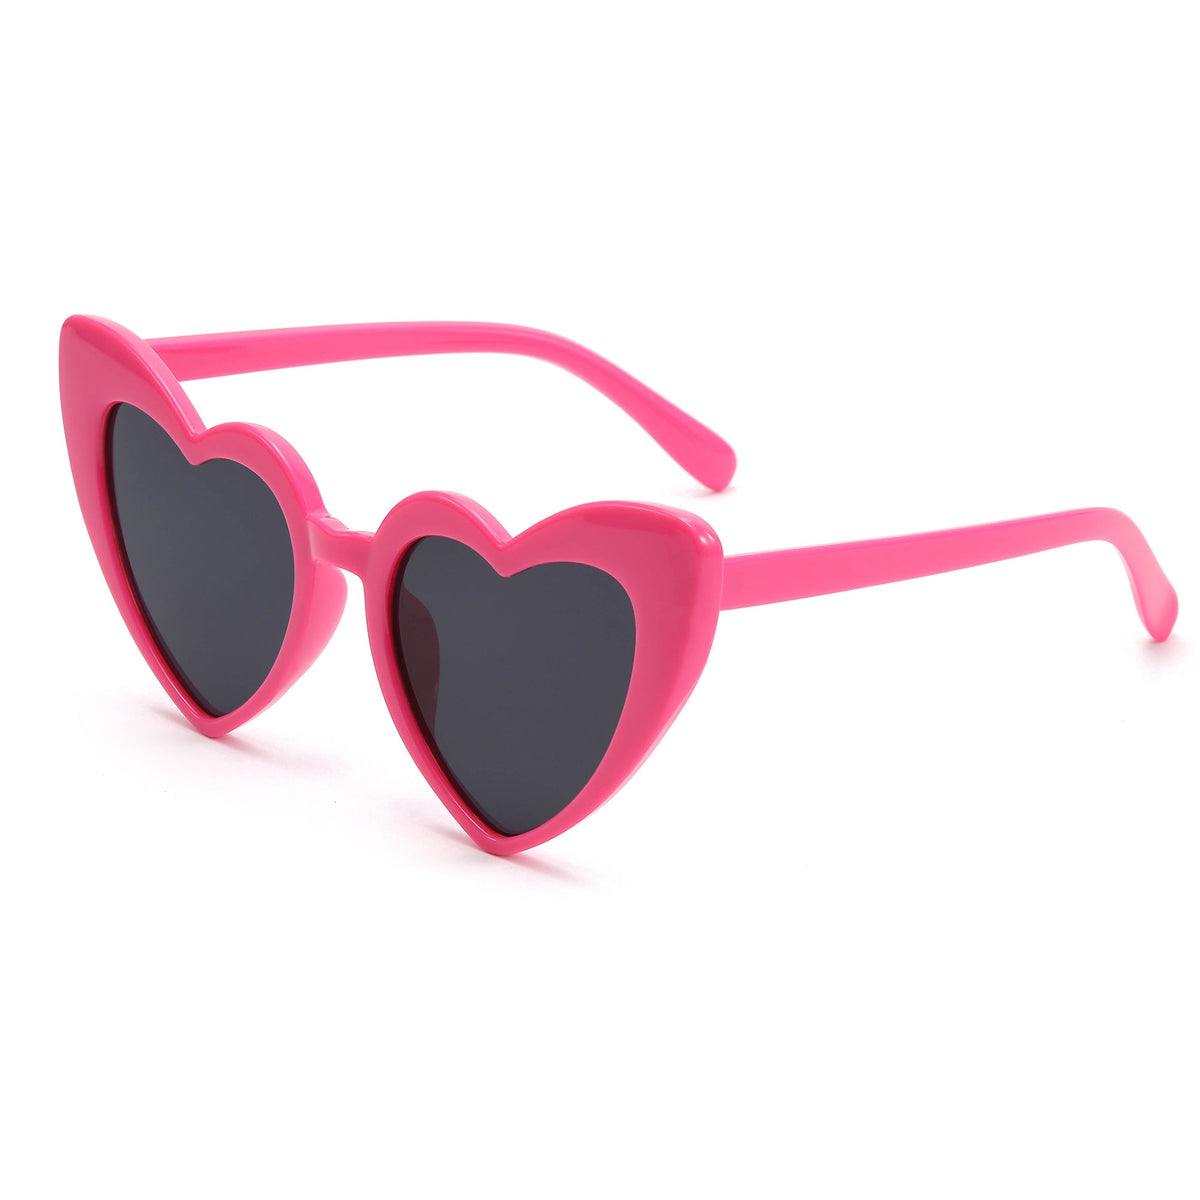 Taizhou Two Circles Trading Co. Ltd. Costume Accessories Pink Heart-Shaped Fashion Sunglasses for Adults